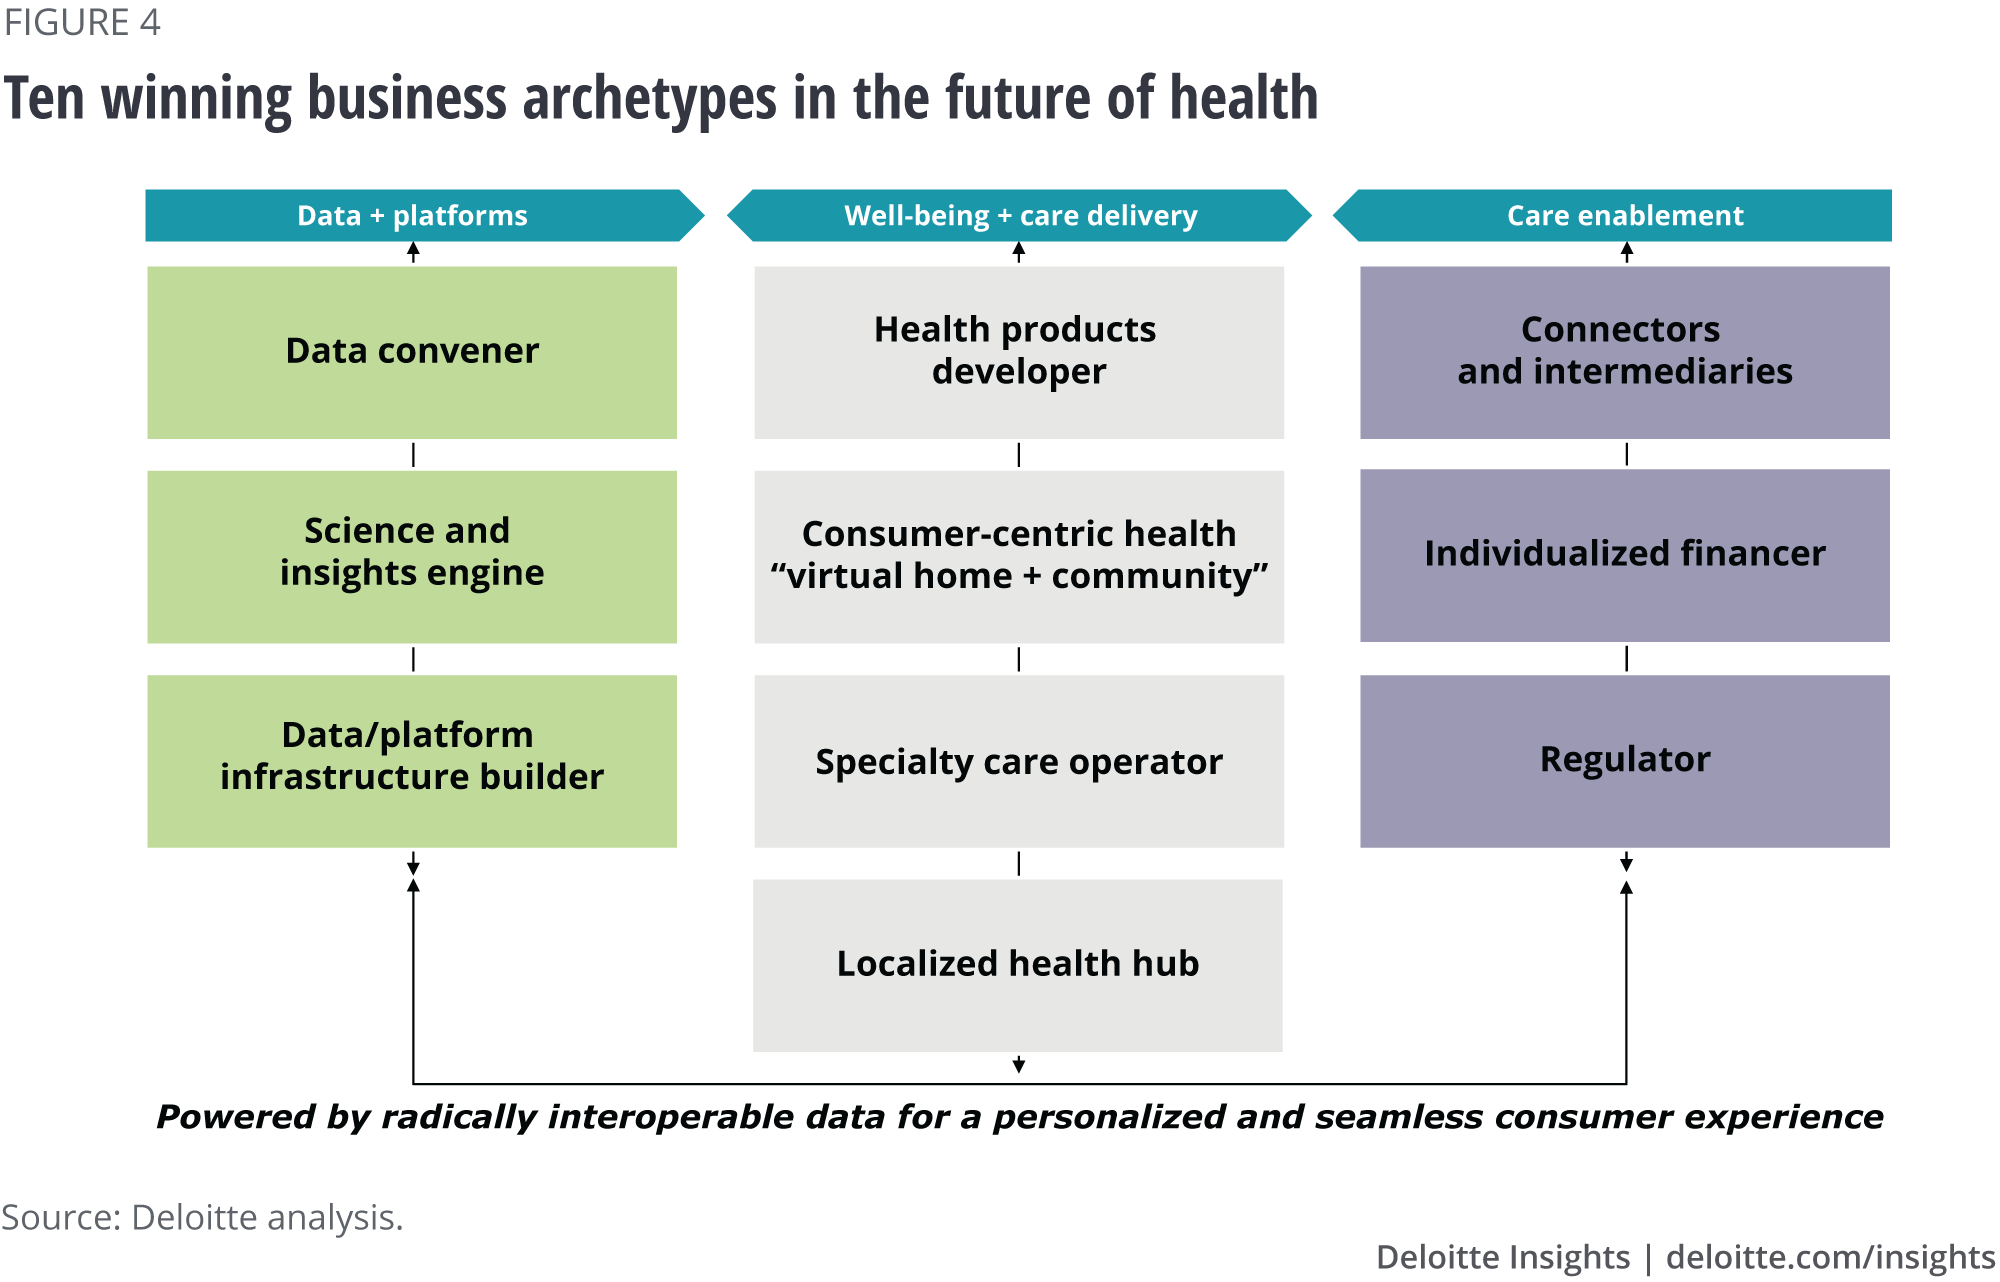 Ten winning business archetypes in the future of health